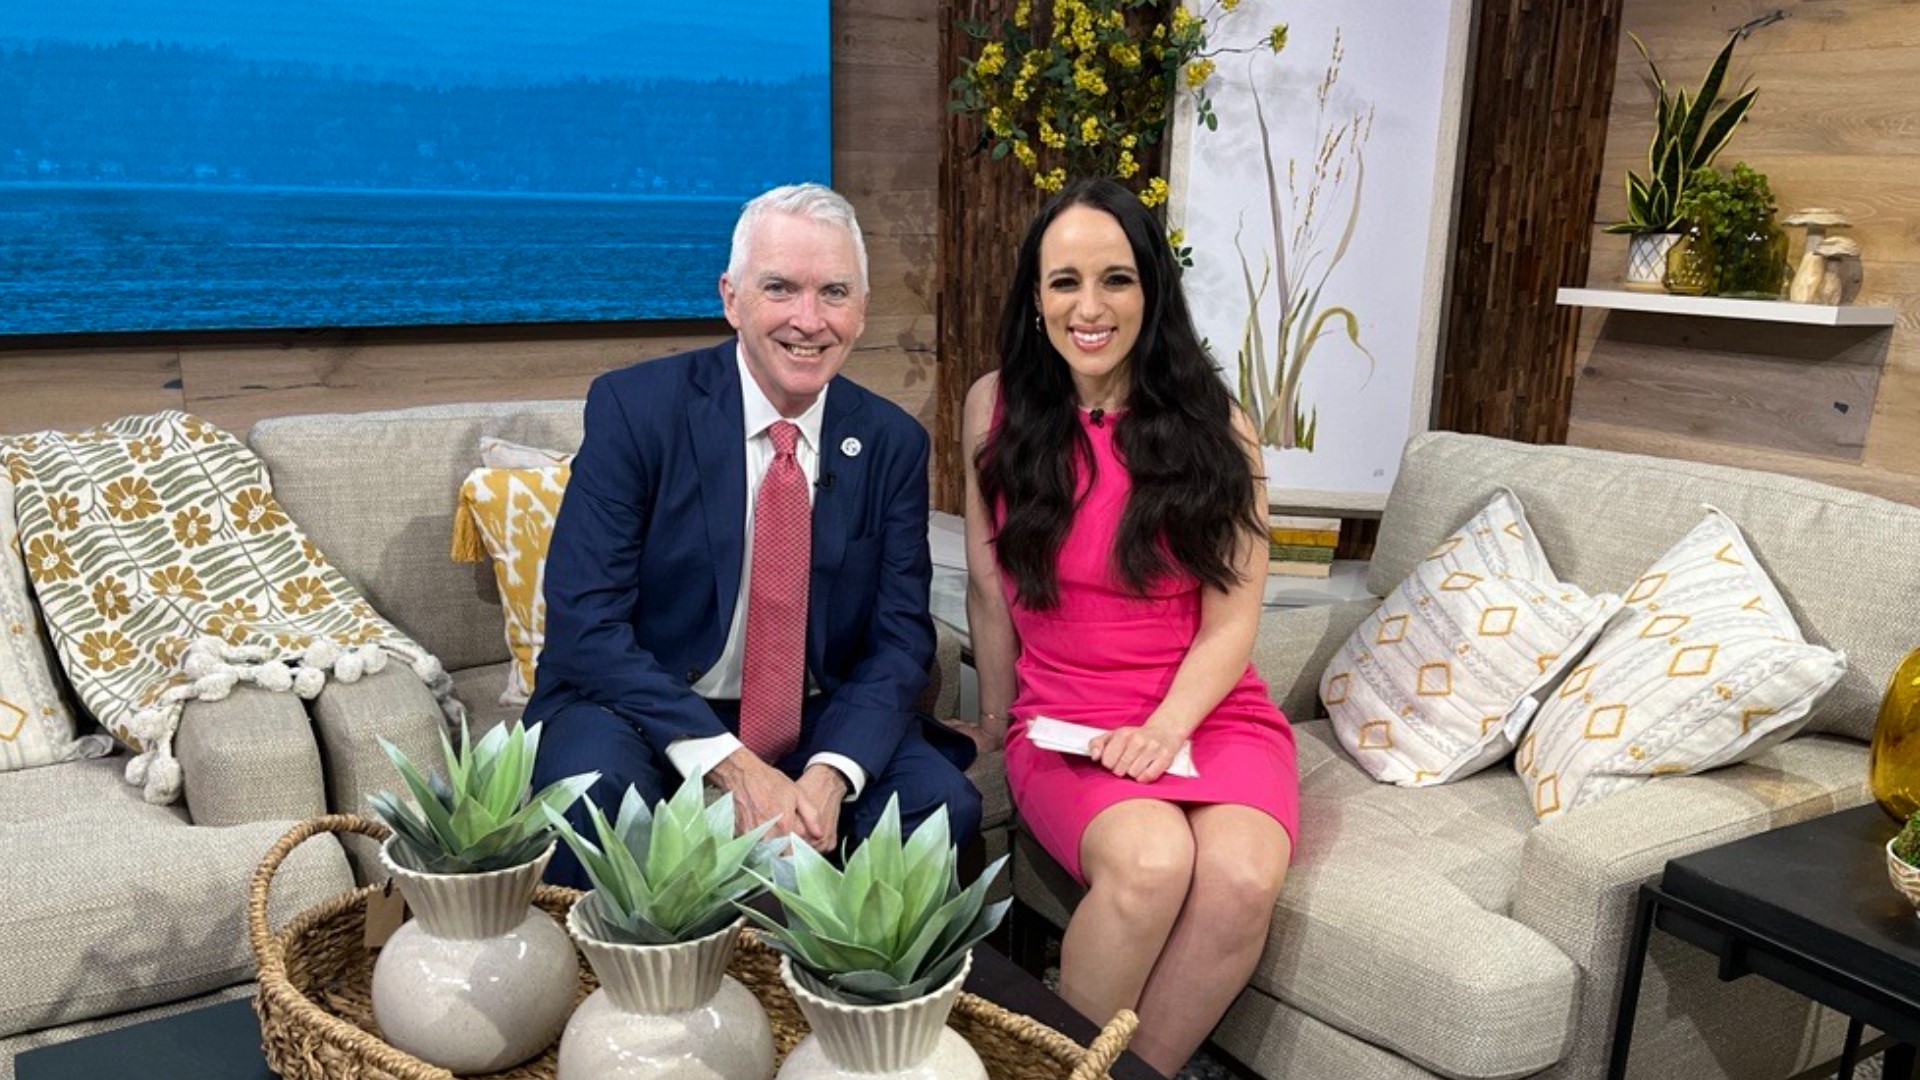 Dr. Tom Lynch from Fred Hutch explains how to register for the annual bike ride and 5K walk/run to raise funds for cancer research. #newdaynw